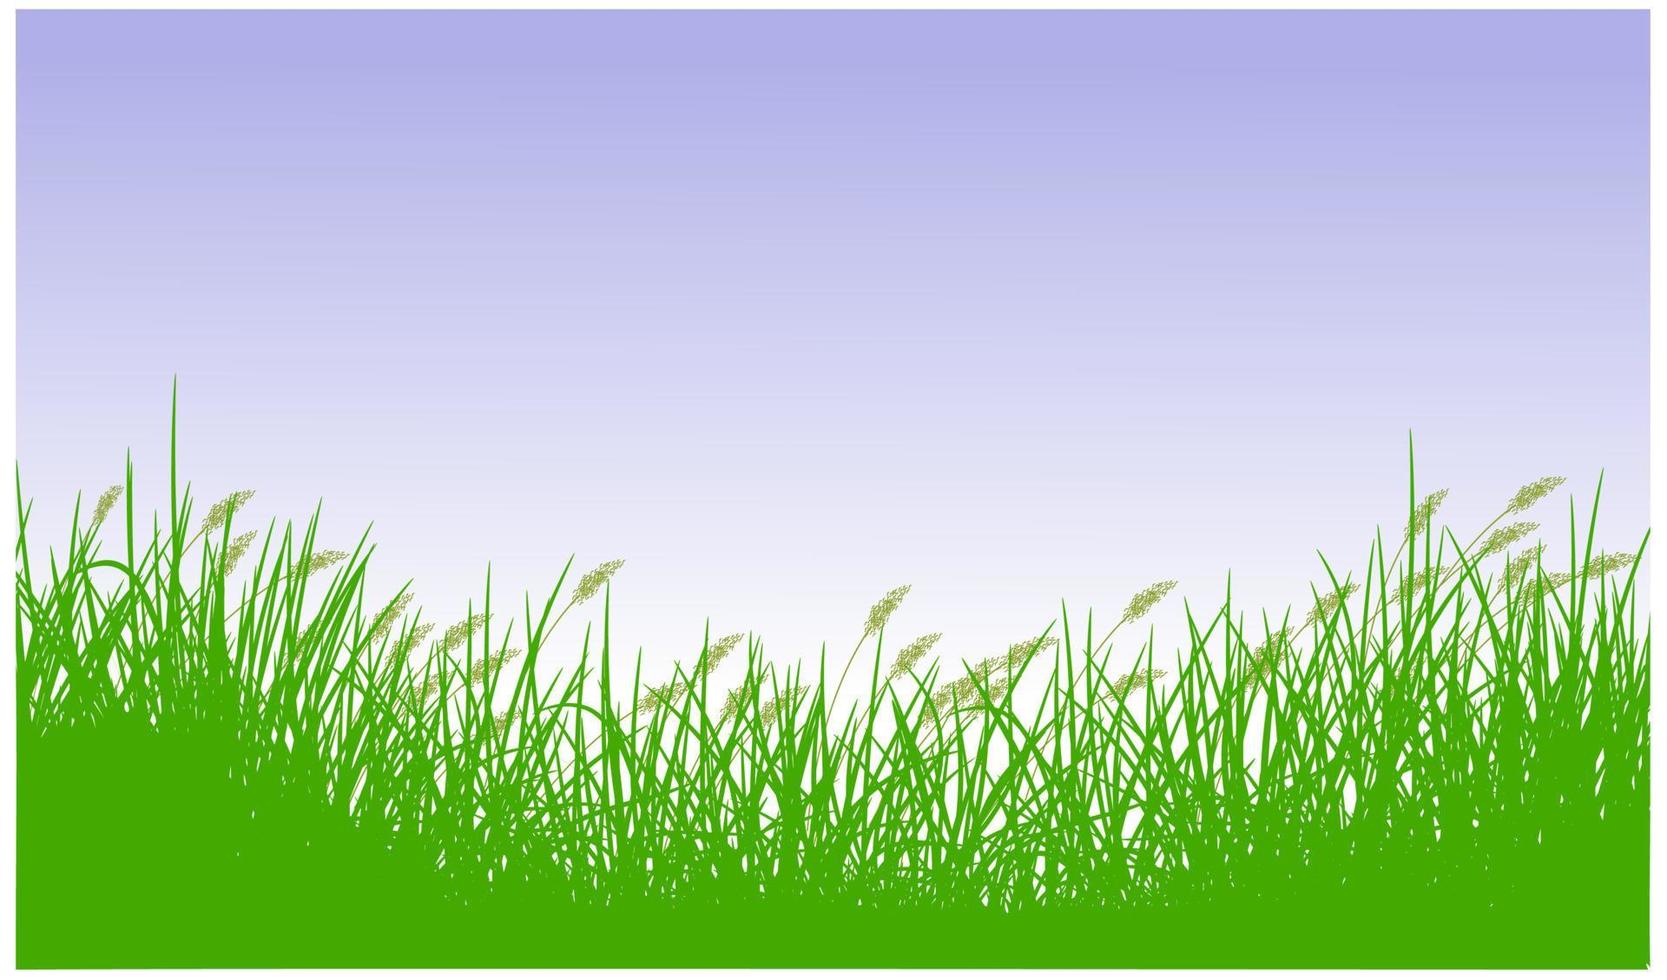 reeds silhouette, reeds grass background vector free